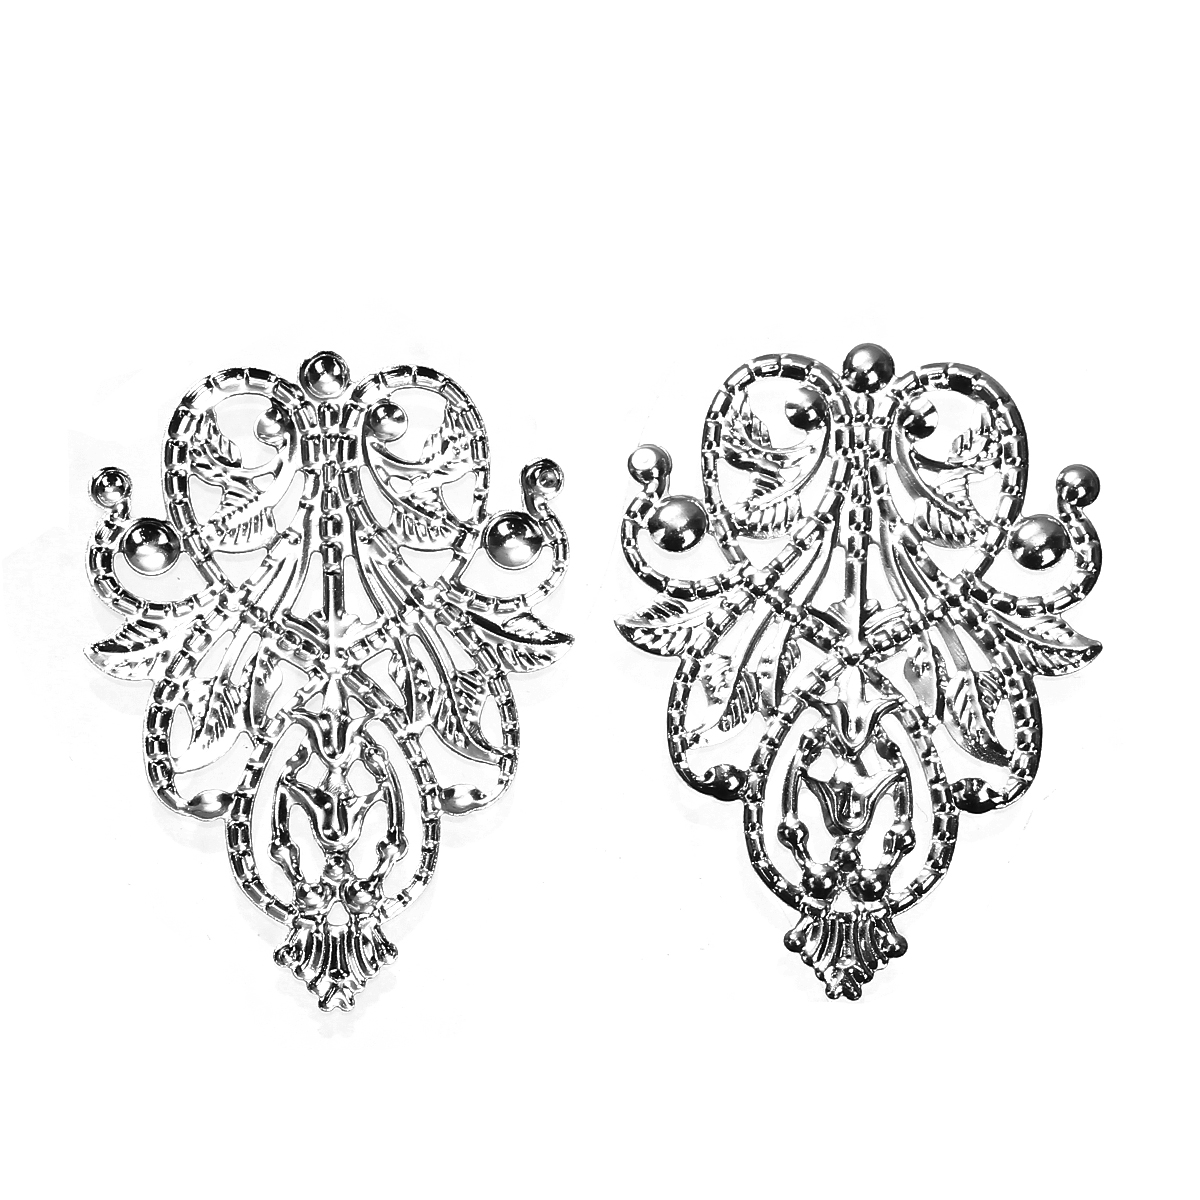 Picture of Iron Based Alloy Embellishments Crown Silver Tone Filigree Carved 48mm(1 7/8") x 35mm(1 3/8"), 30 PCs